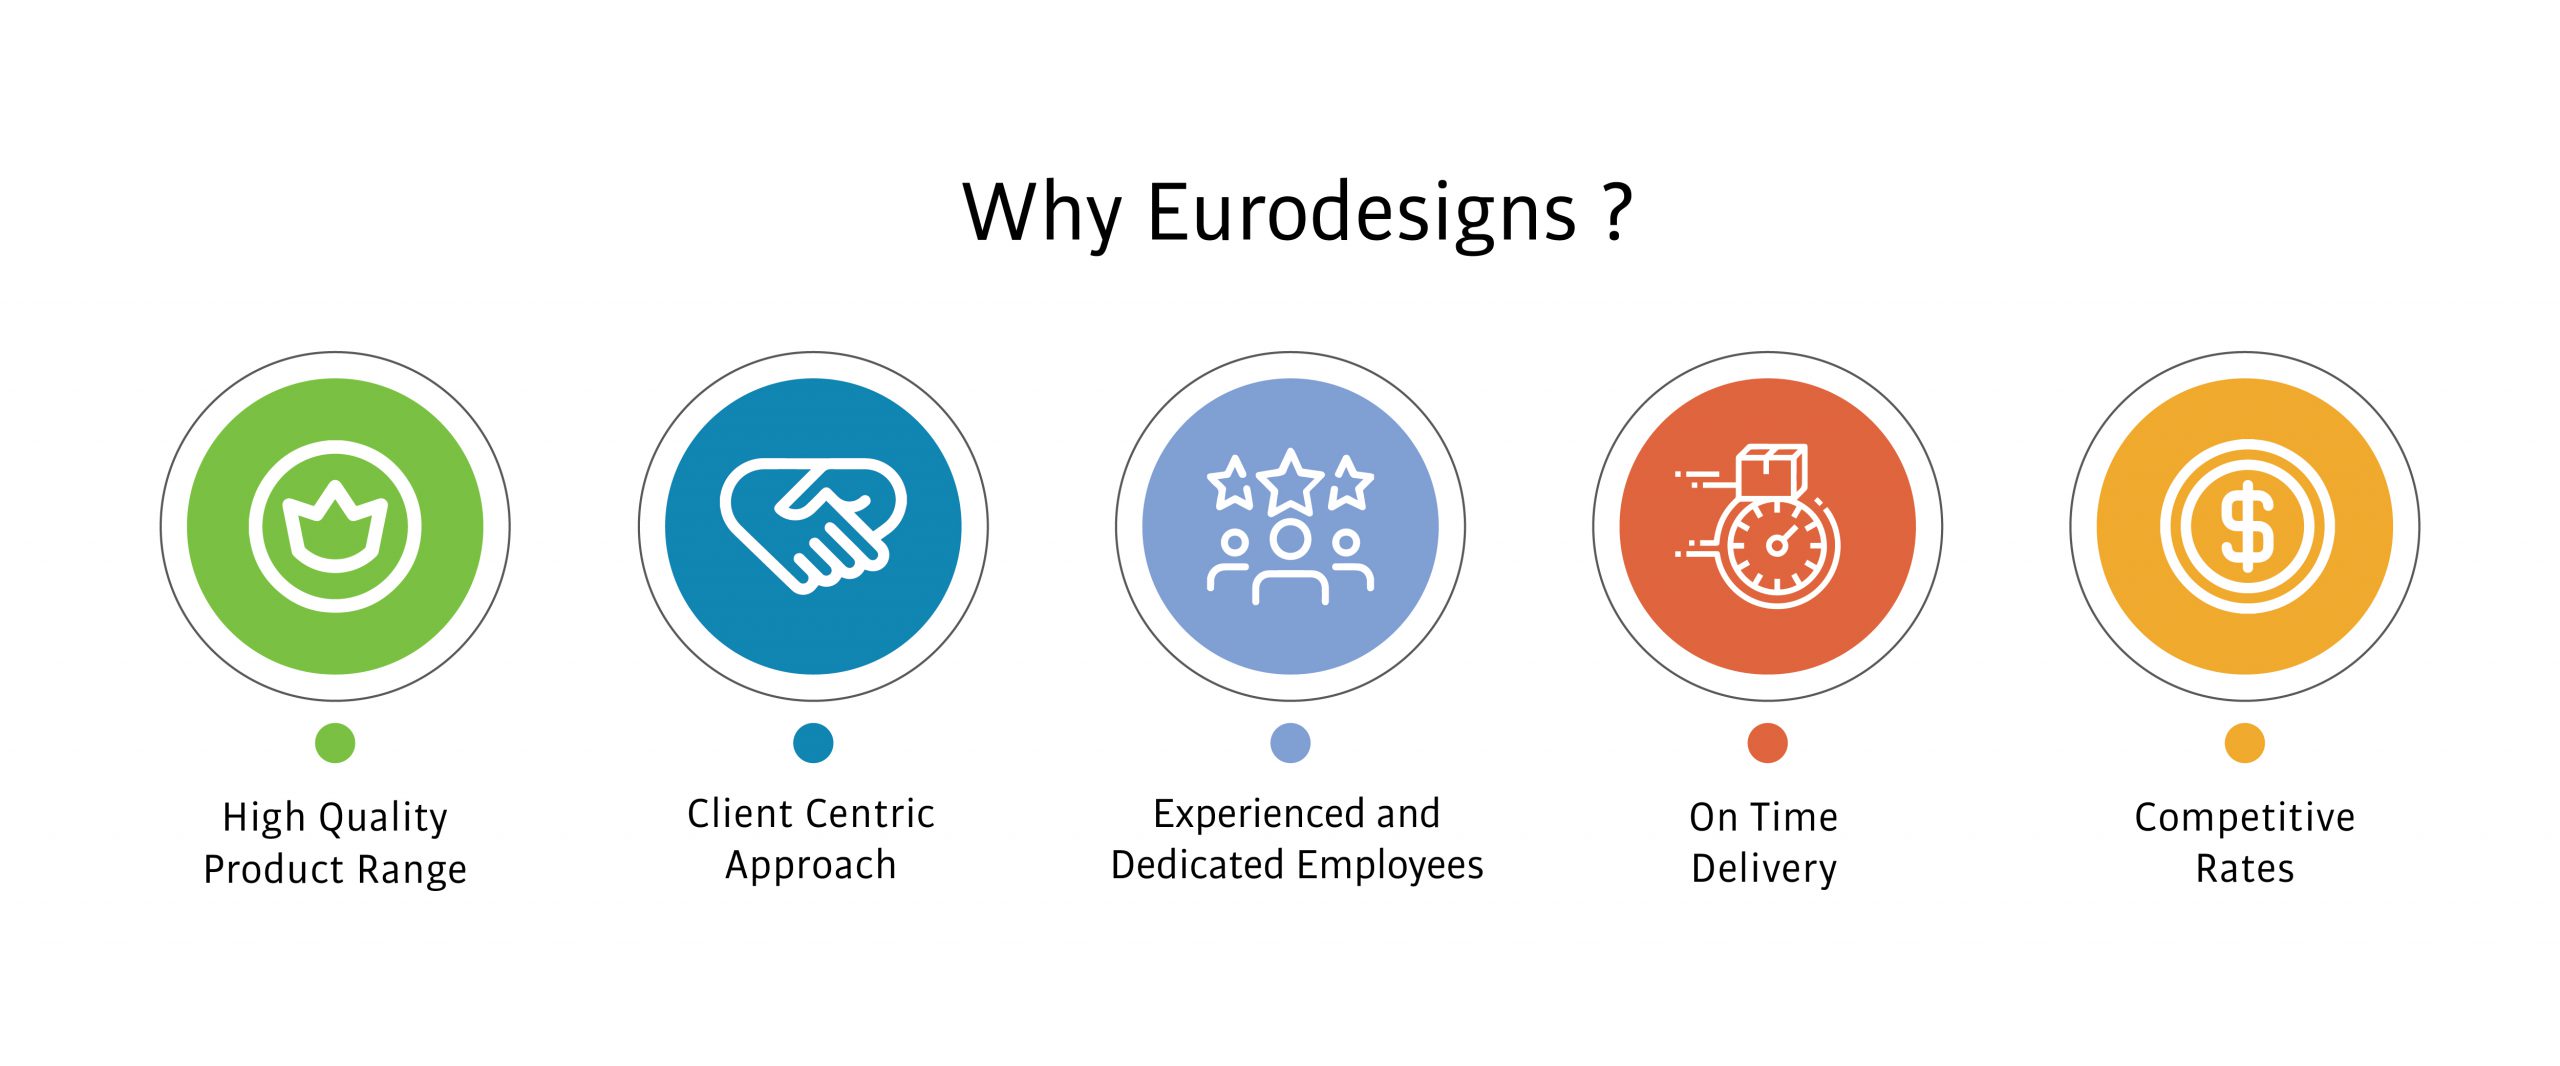 http://eurodesignsgroup.com/wp-content/uploads/2020/09/why-eurodesigns-01-scaled.jpg